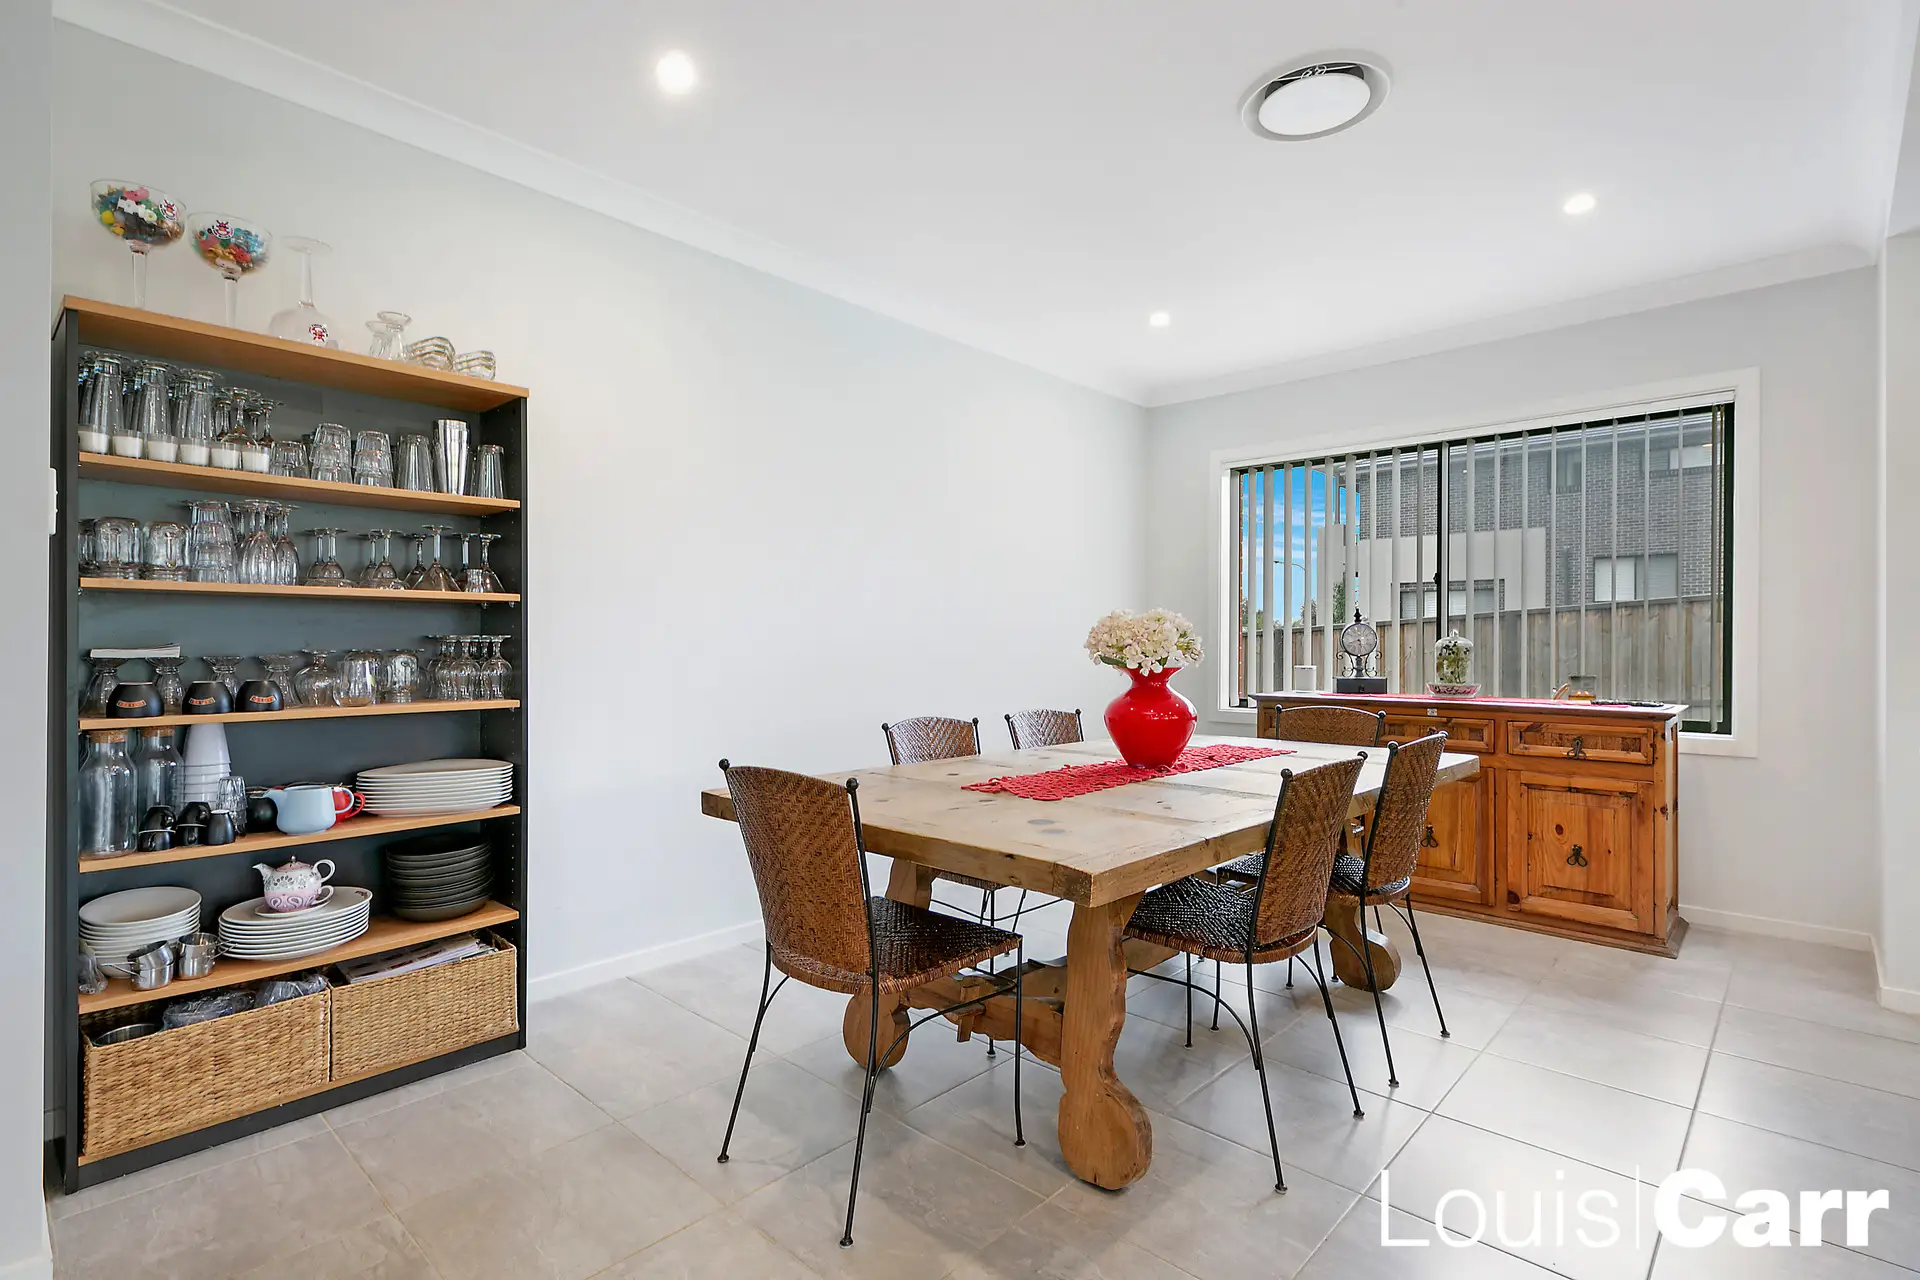 Photo #3: 17 Florence Avenue, Kellyville - Sold by Louis Carr Real Estate